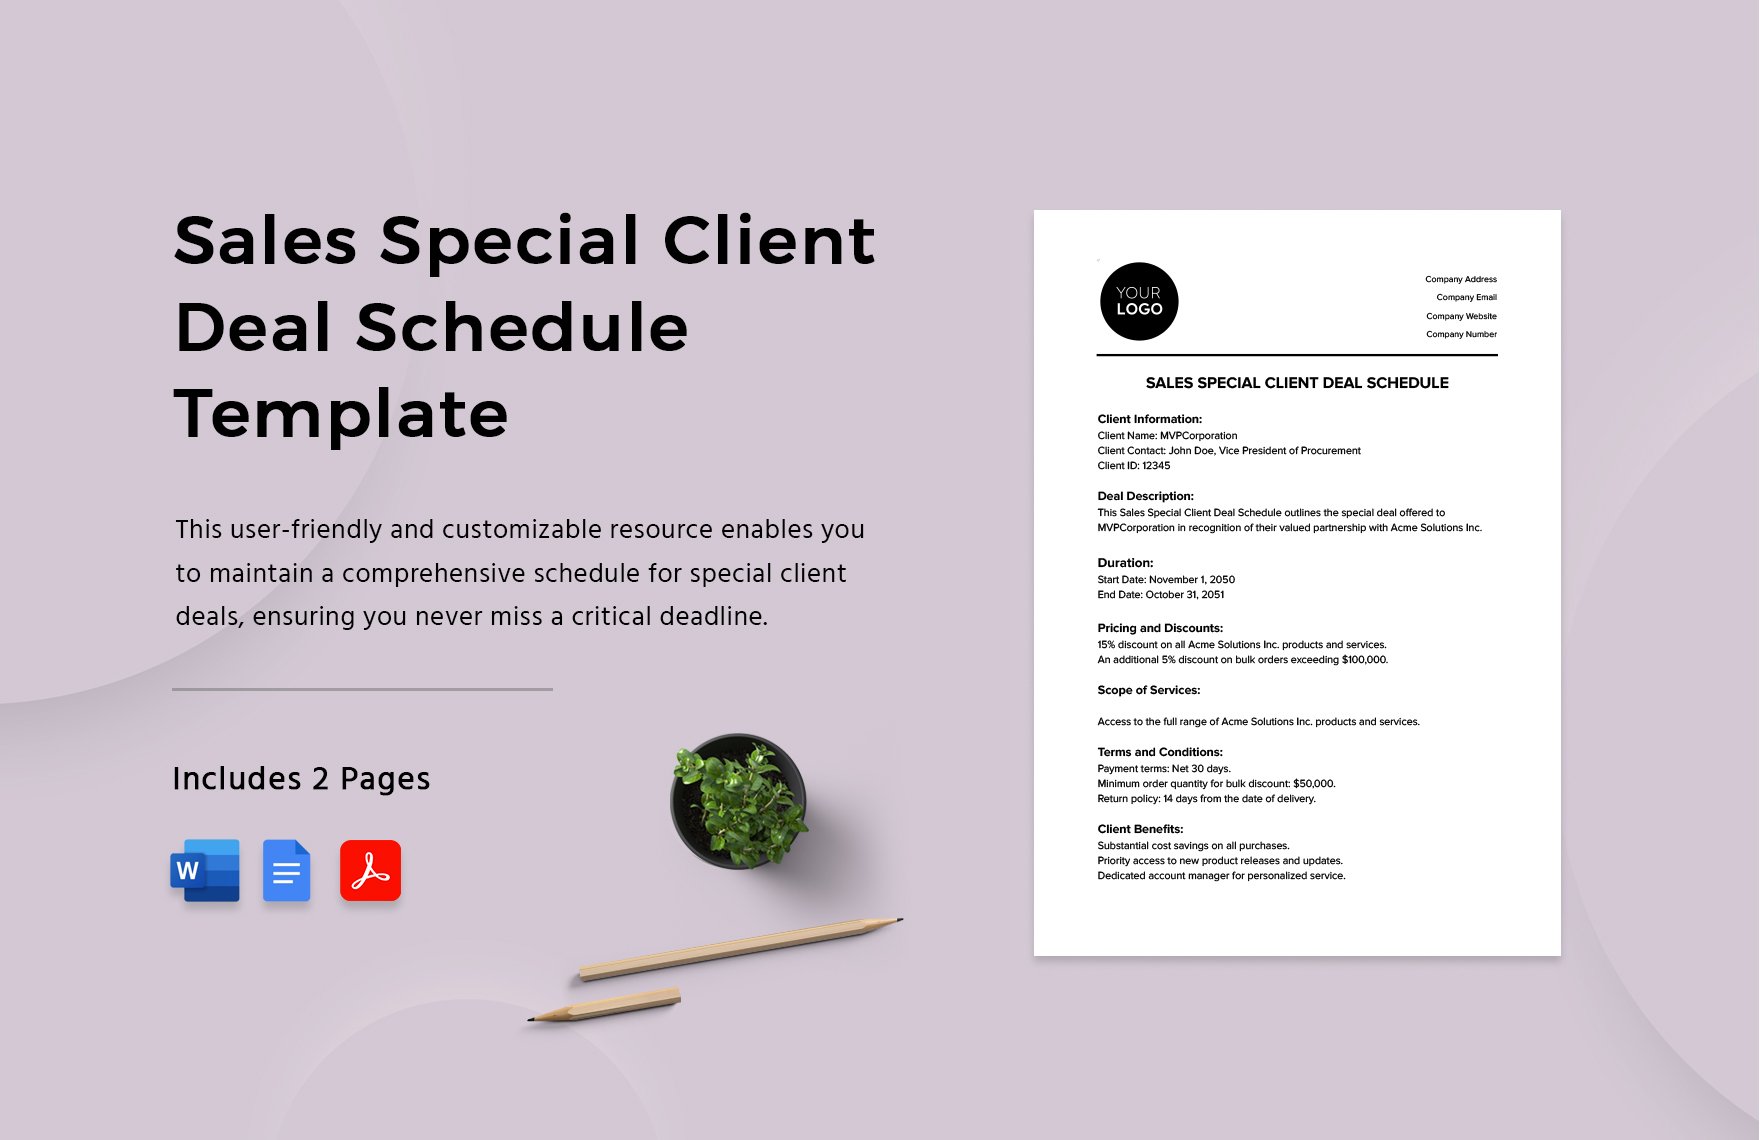 Sales Special Client Deal Schedule Template